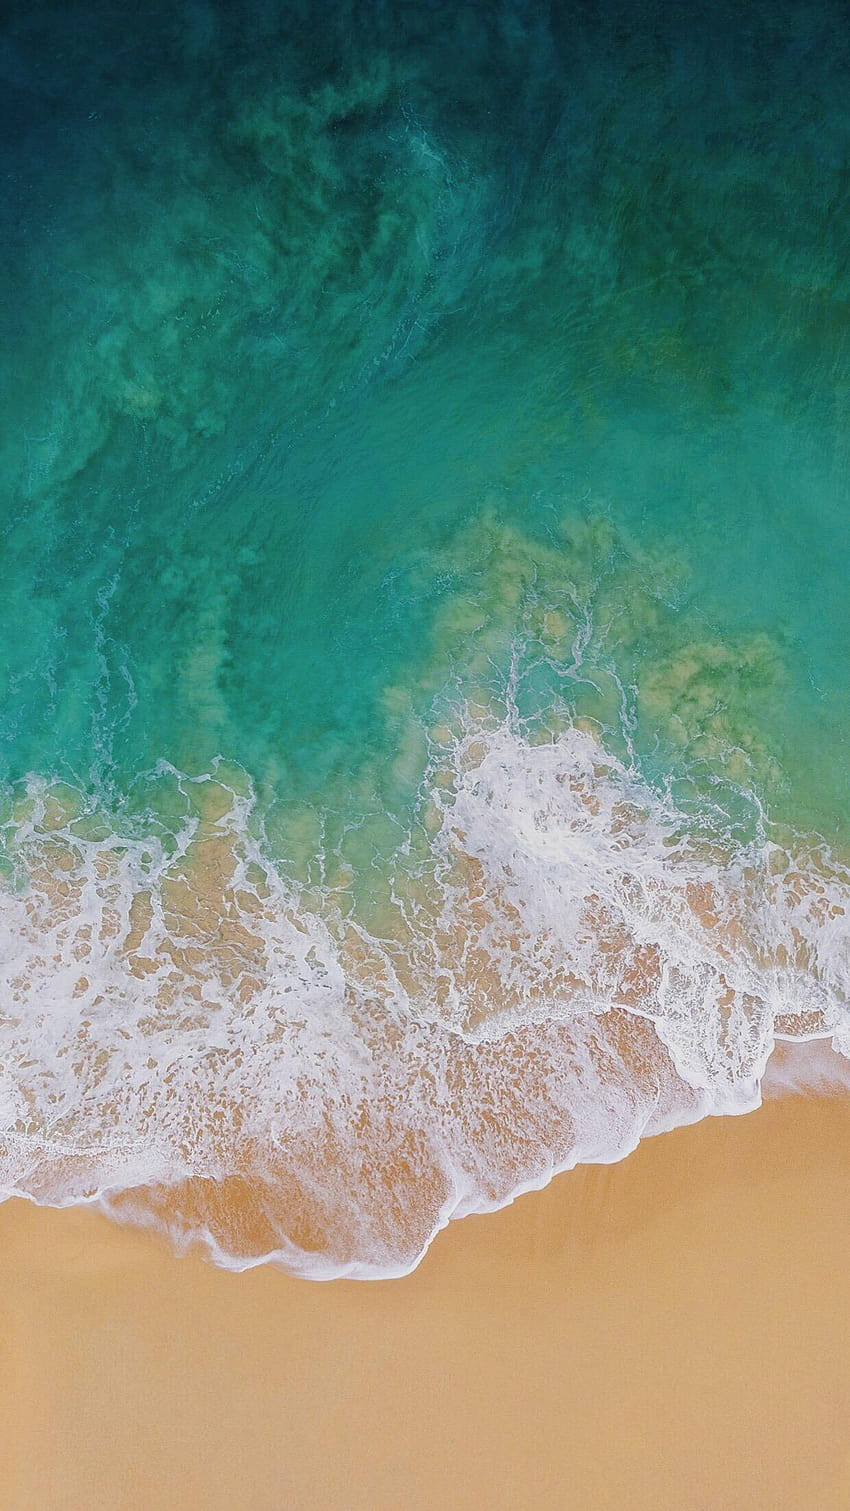 Ios 11 Introduces Many New Features And Improvements, iphone beach HD phone wallpaper